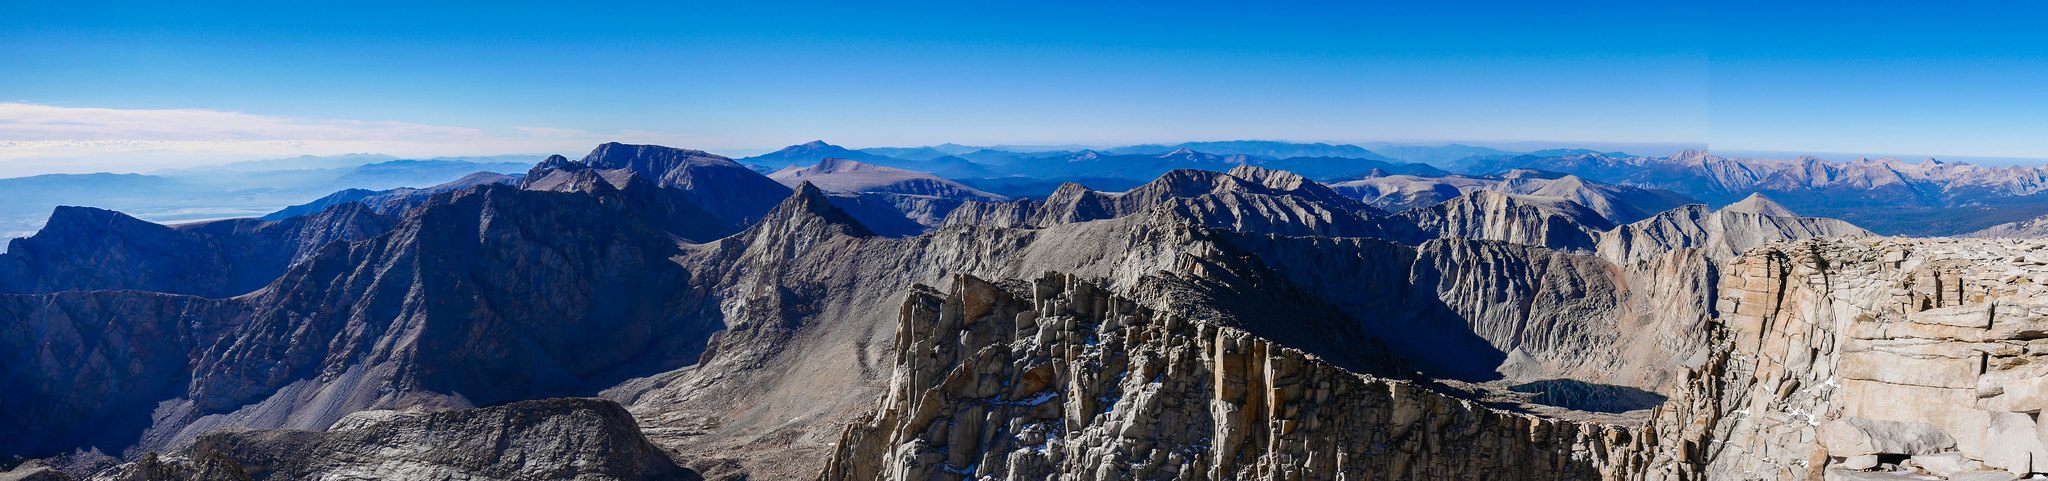 View from the summit of Mount Whitney